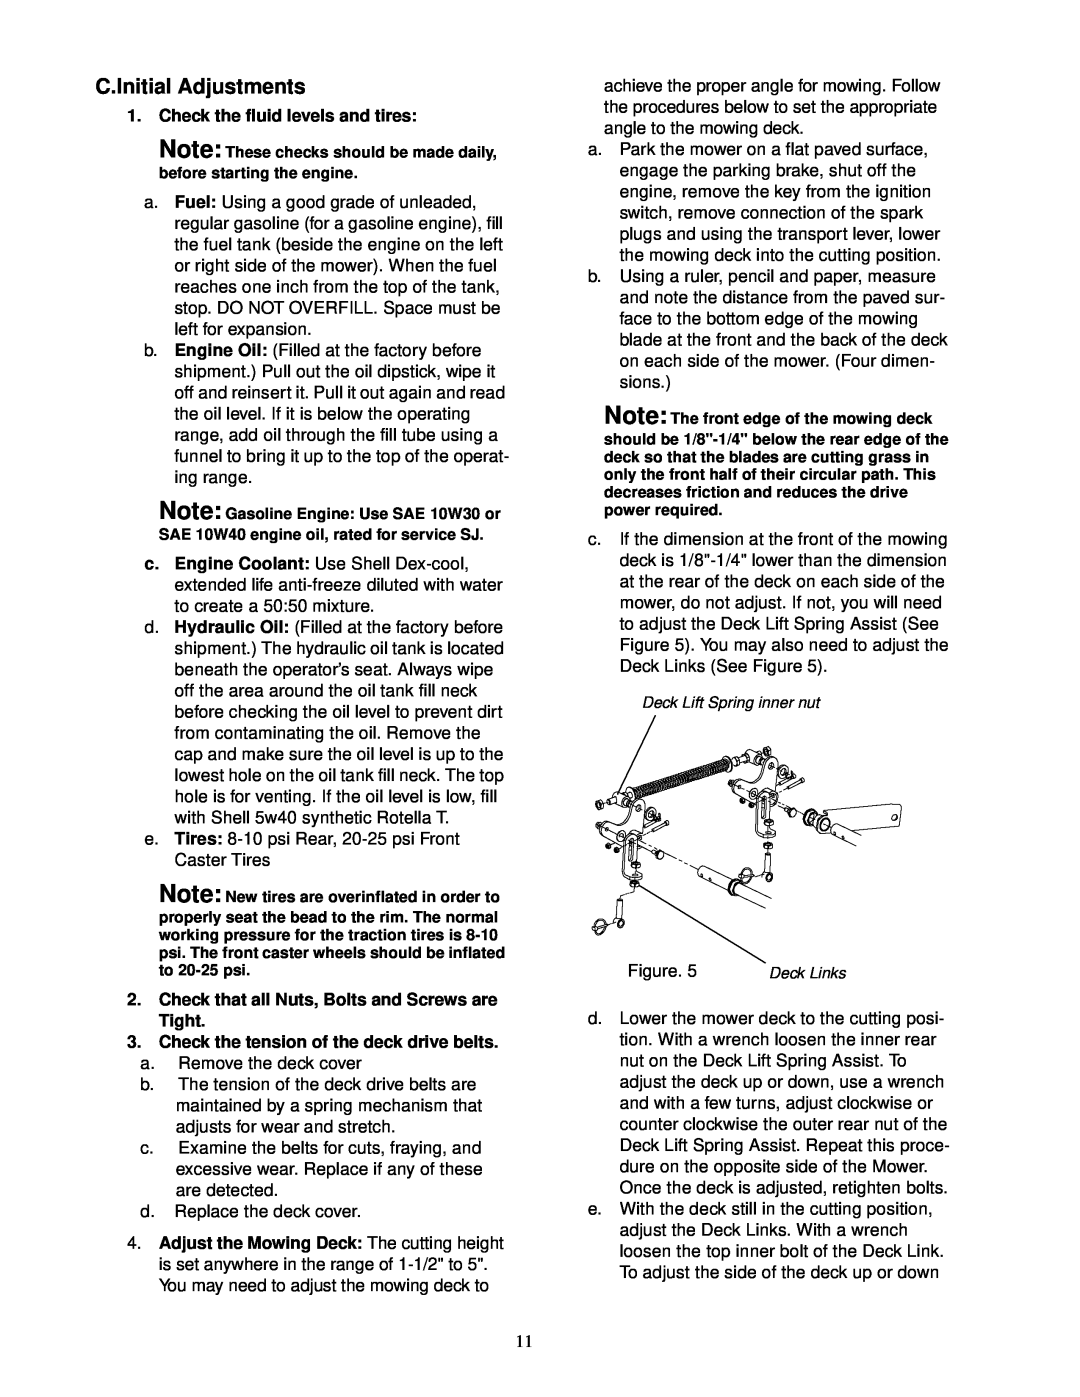 Cub Cadet 60-inch & 72-inch Fabricated Deck service manual C.Initial Adjustments, Check the fluid levels and tires 